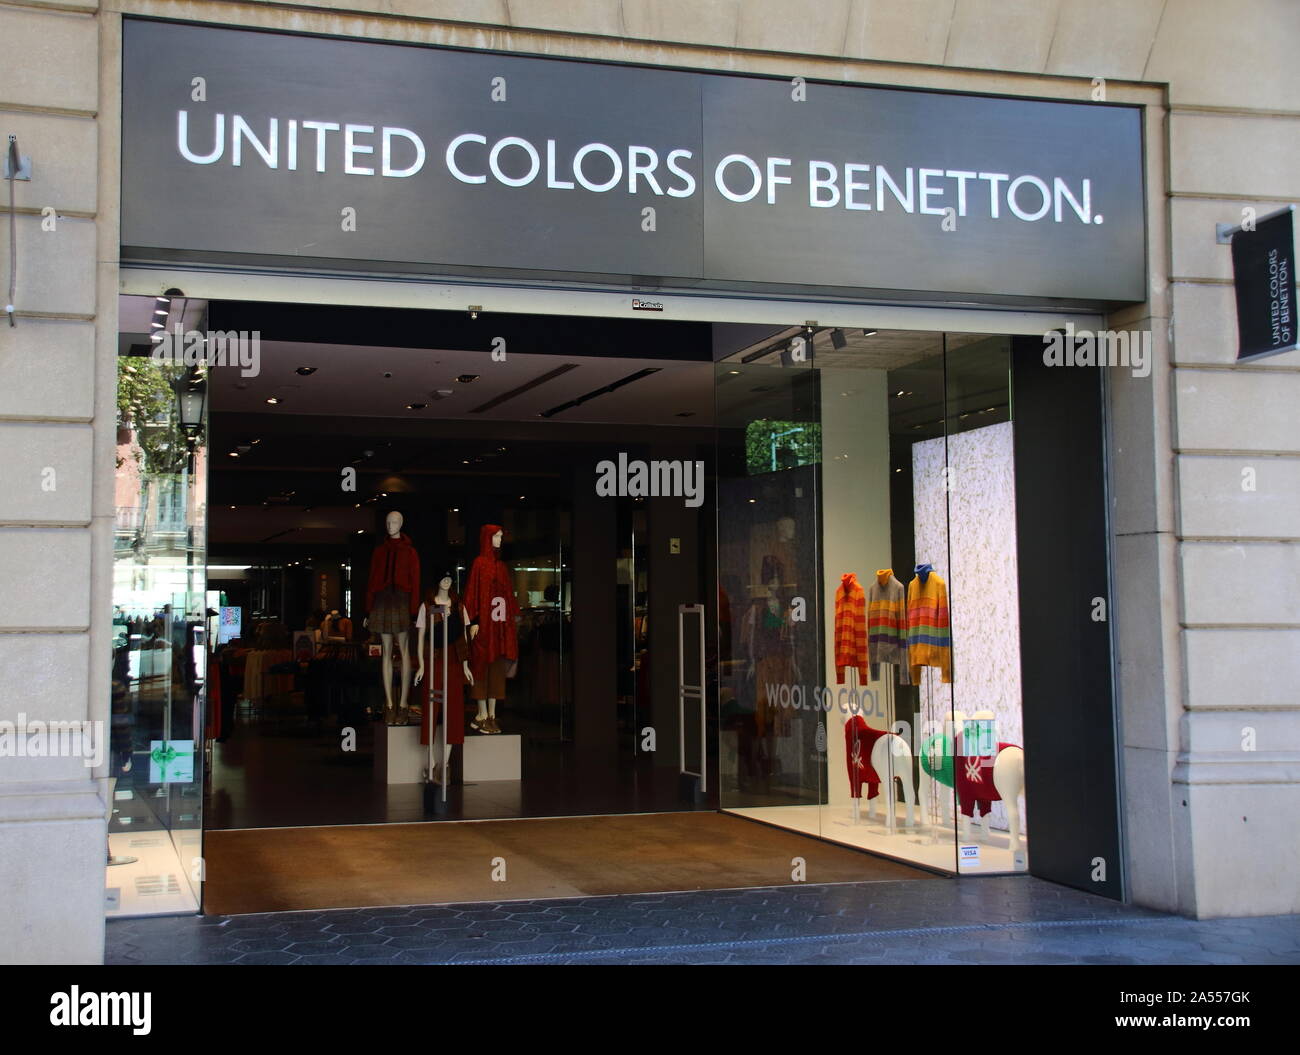 Page 2 - Benetton Shop High Resolution Stock Photography and Images - Alamy